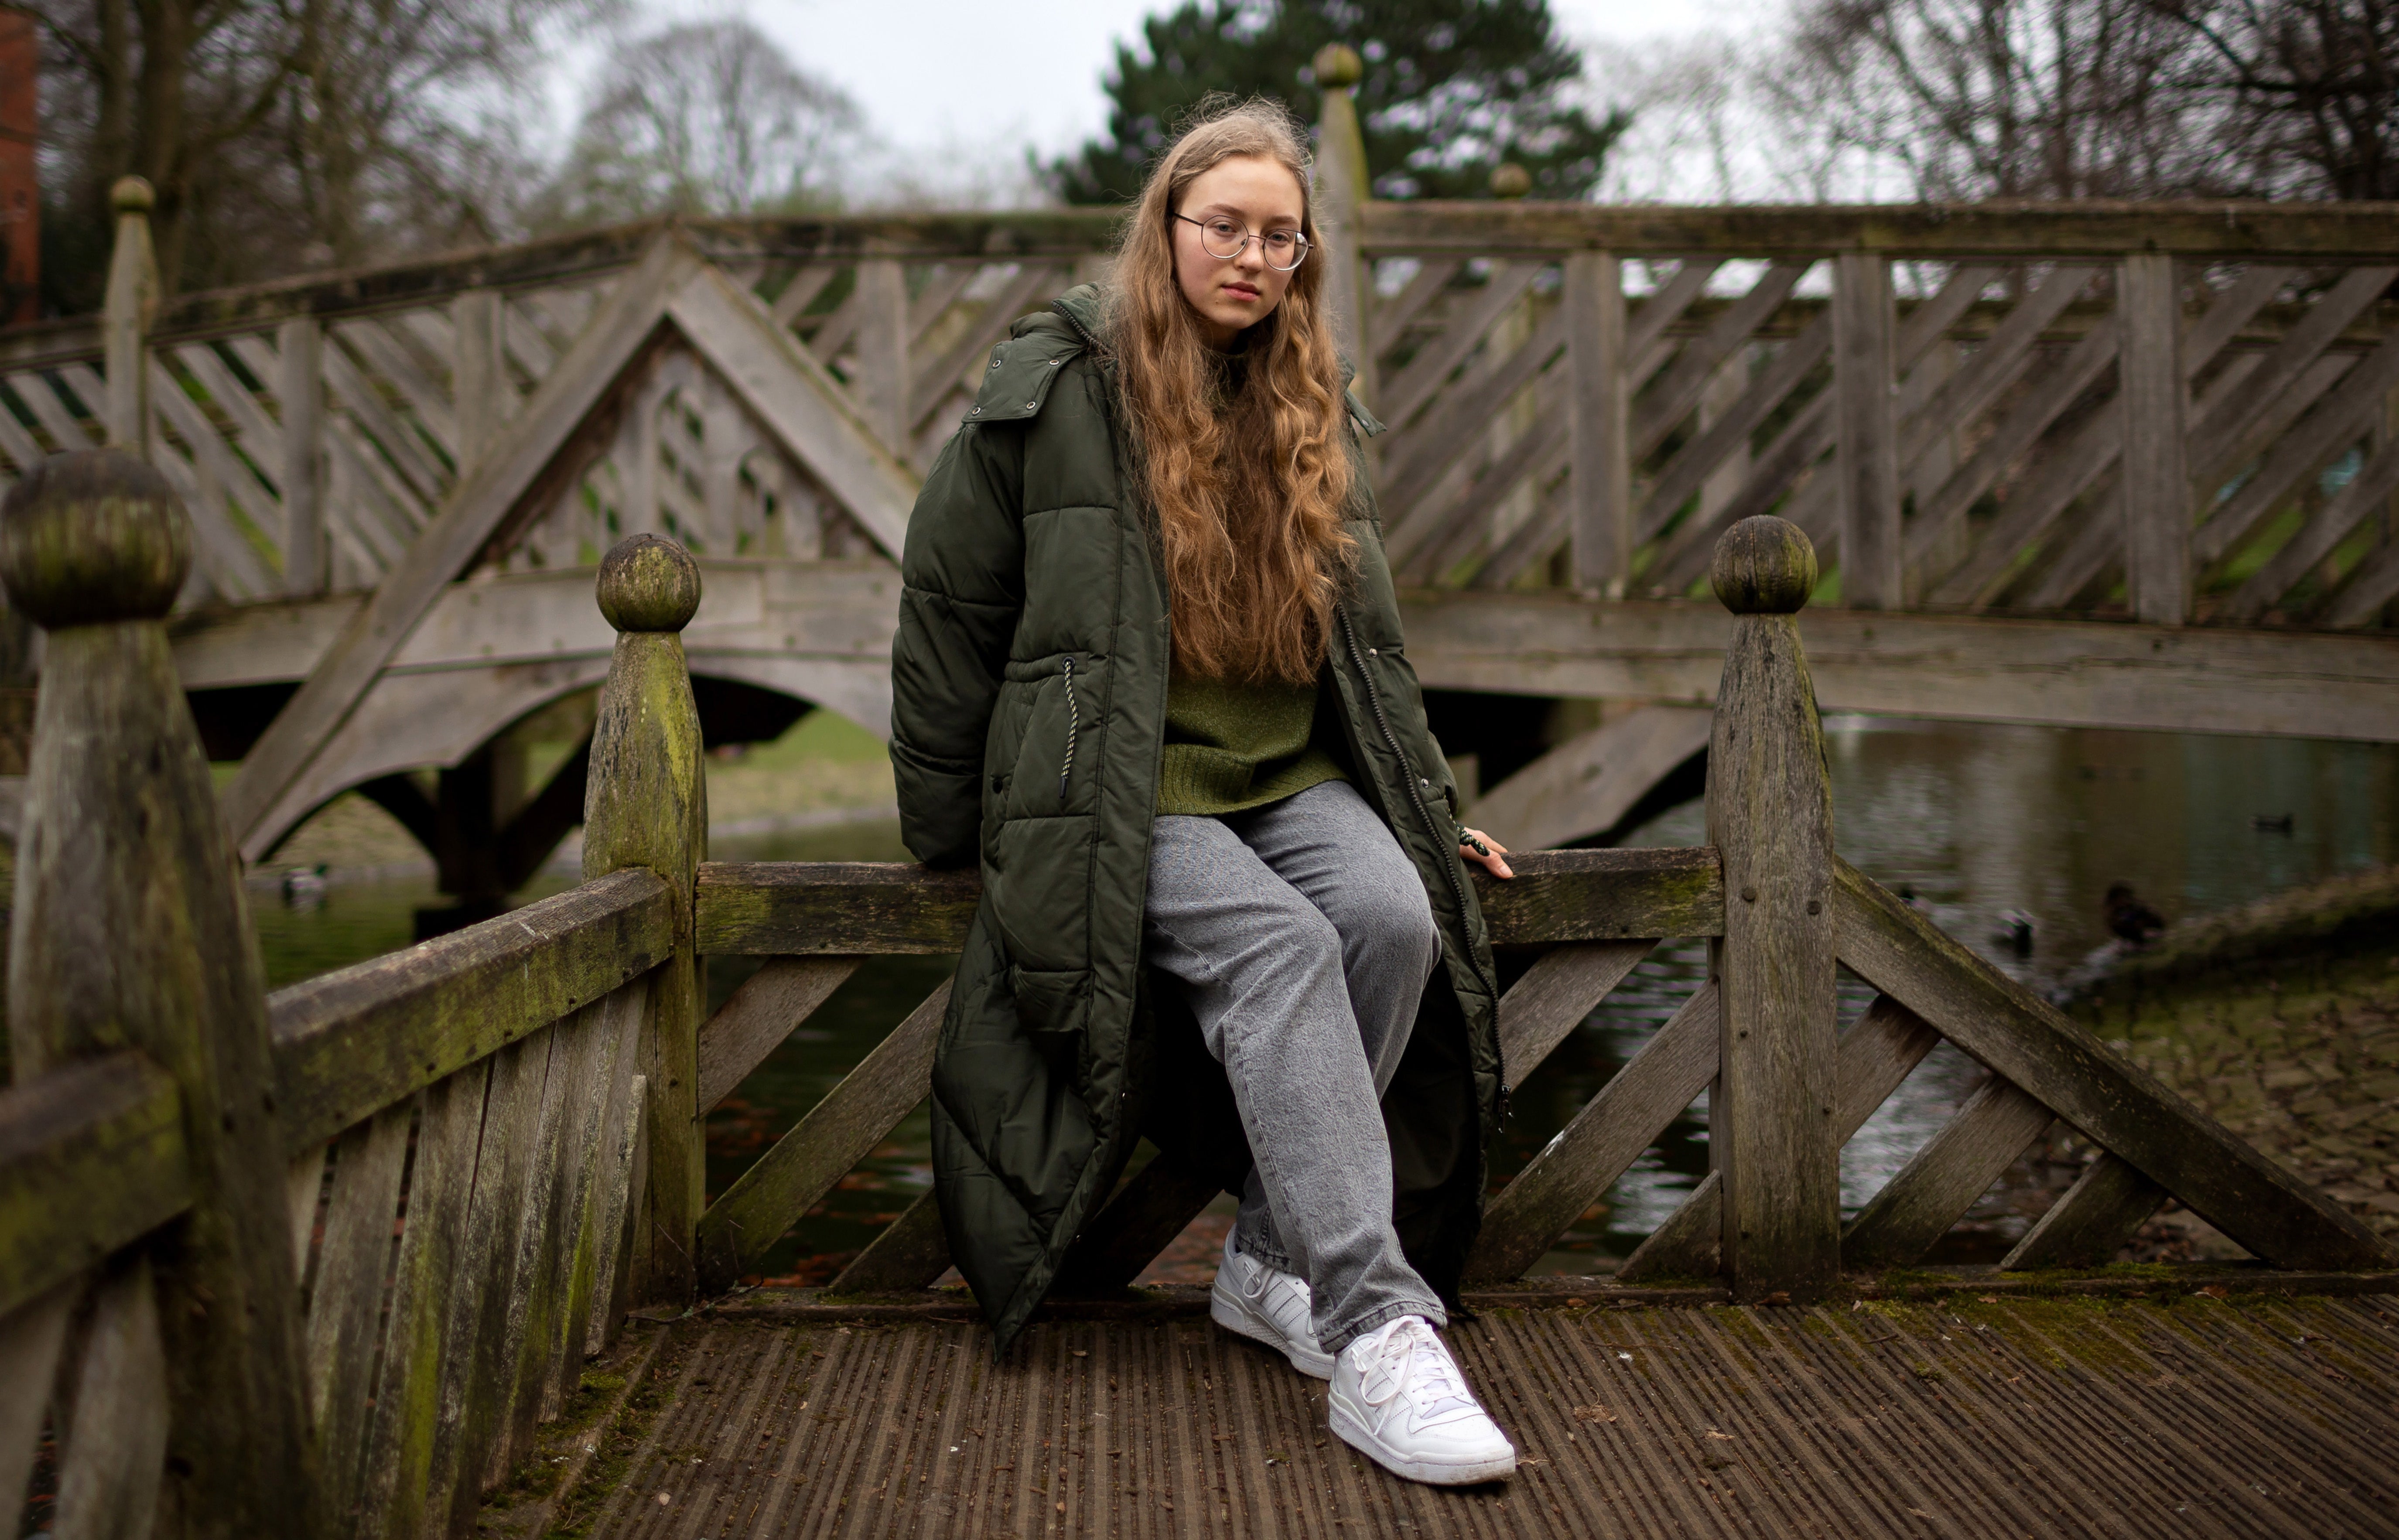 Mariia Ivanchykova, 20, at Weston Park in Sheffield: ‘We lost our home, something that gave us a feeling of belonging, safety and happiness for a long time. Since we left Ukraine, I don’t feel that anymore’